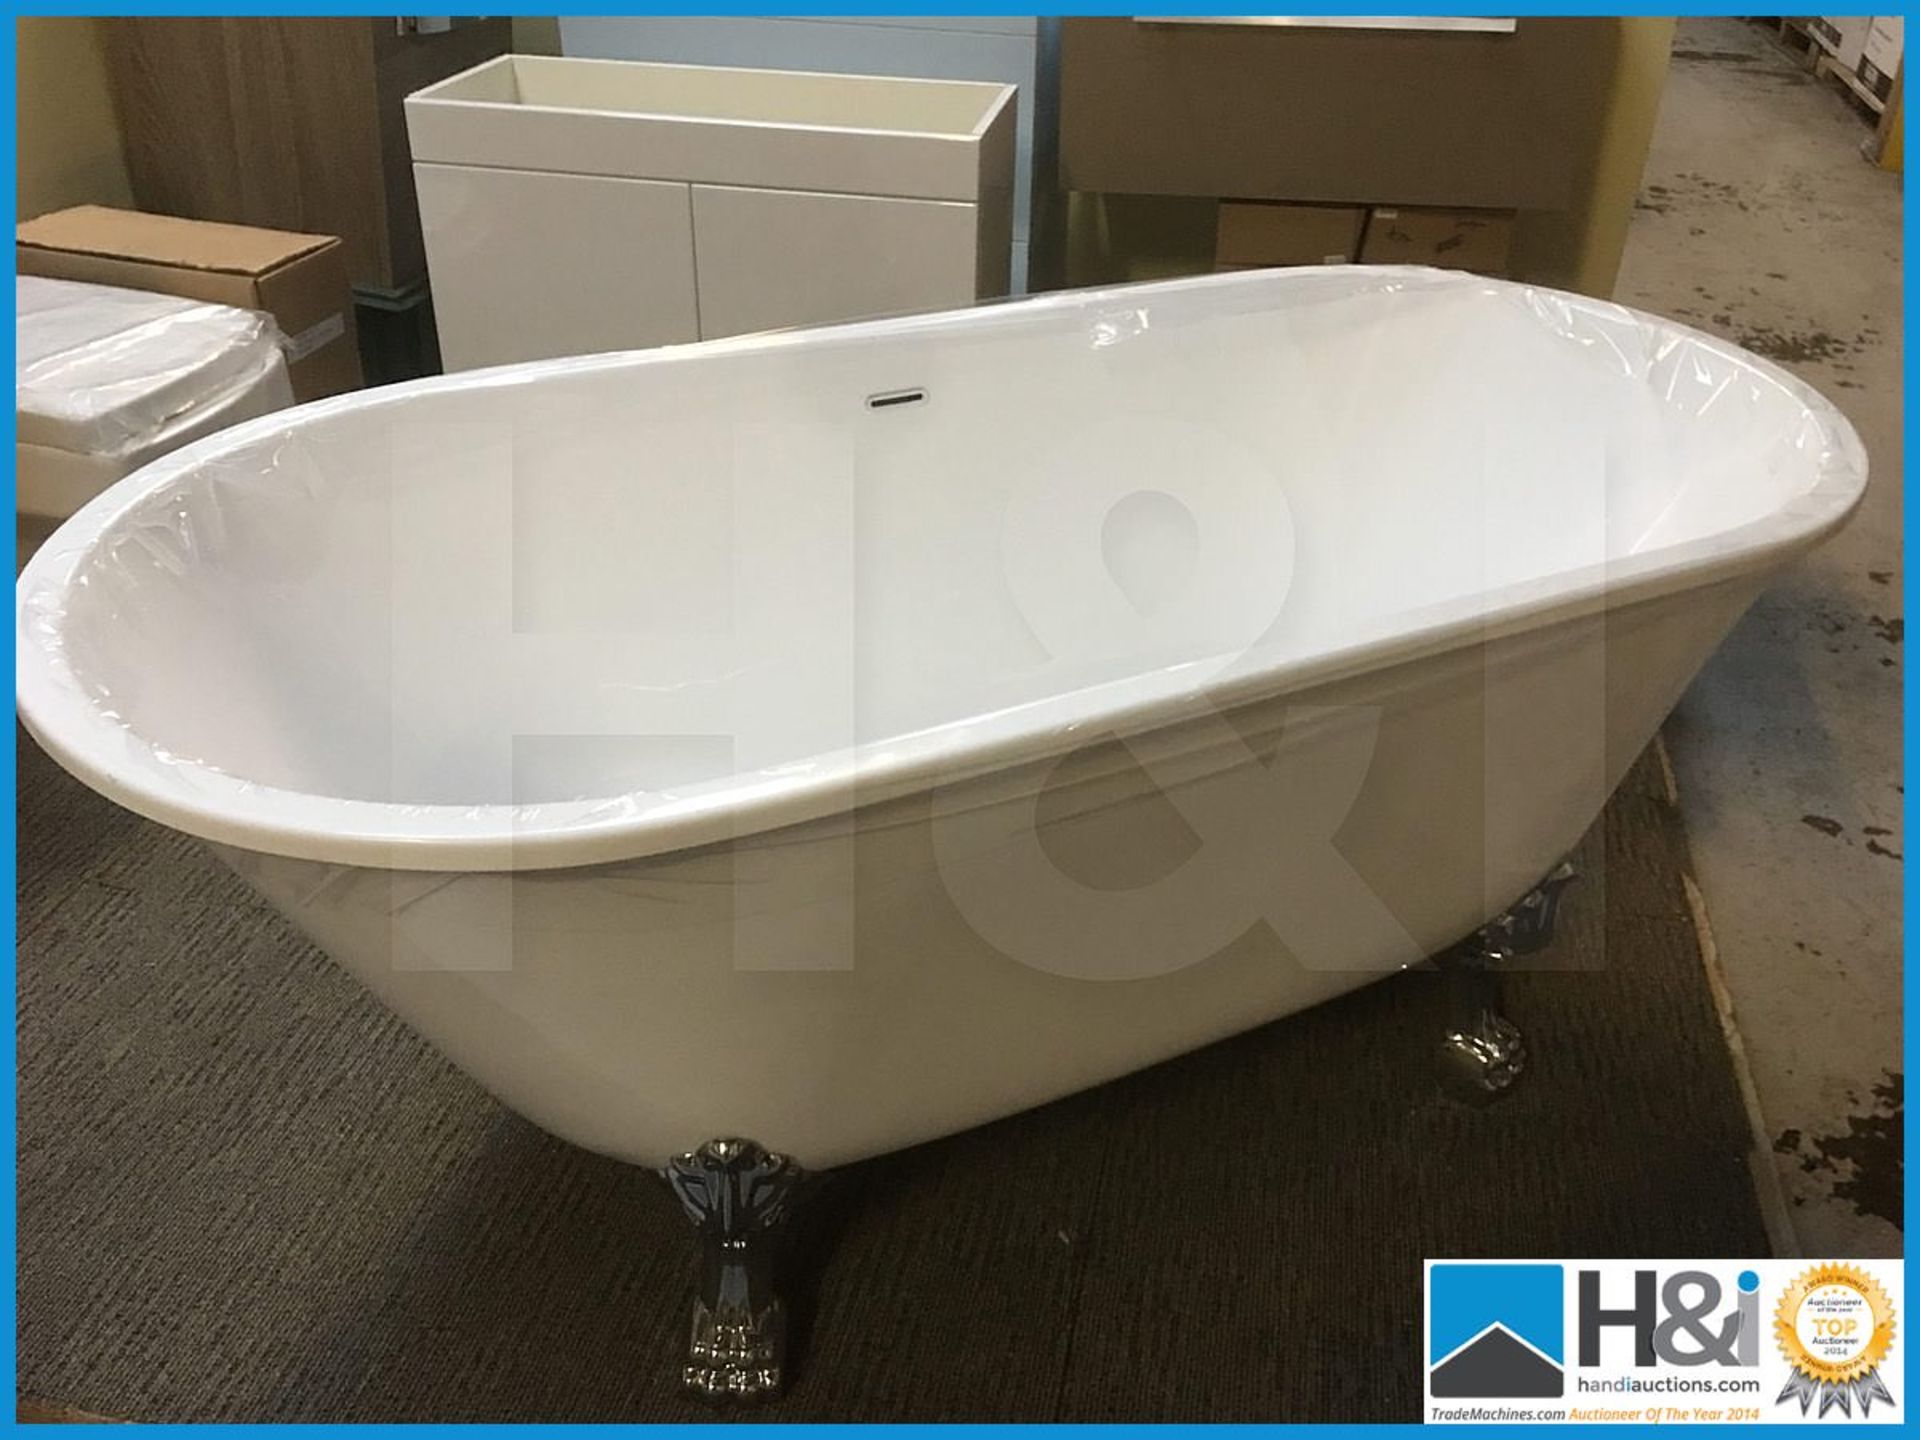 Stunning Hudson Reed Wycomber freestanding bathtub compete with traditional claw feet. High